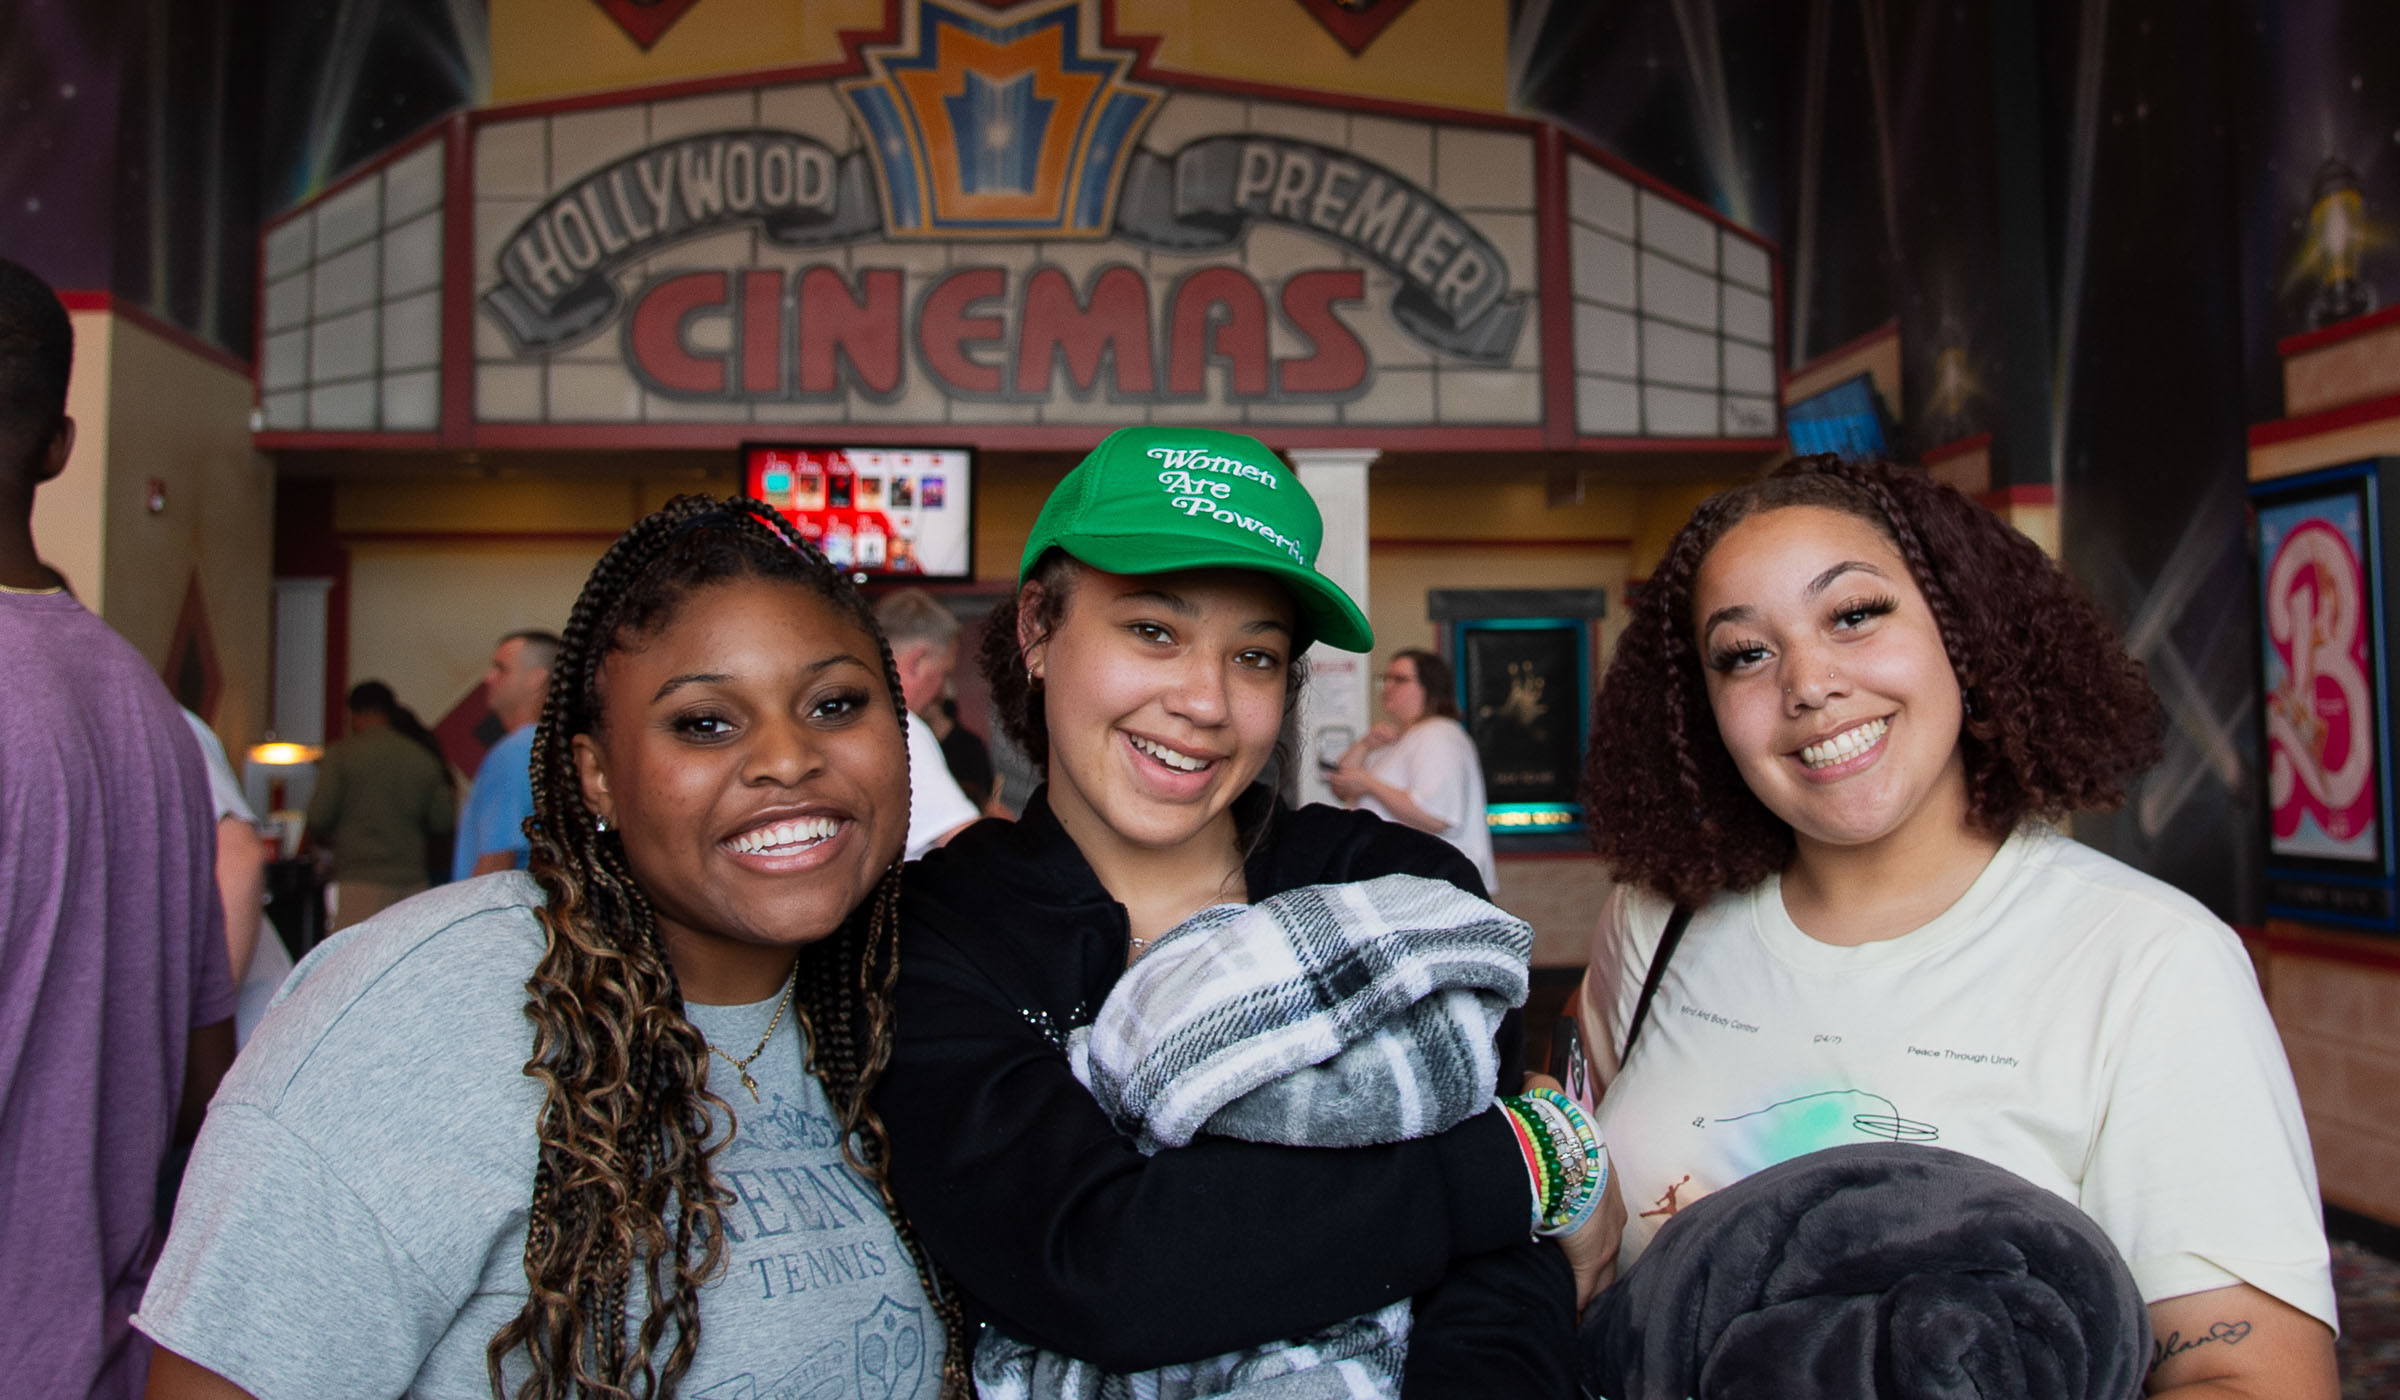 Three College Ready students smile at the camera in the movie theater lobby.